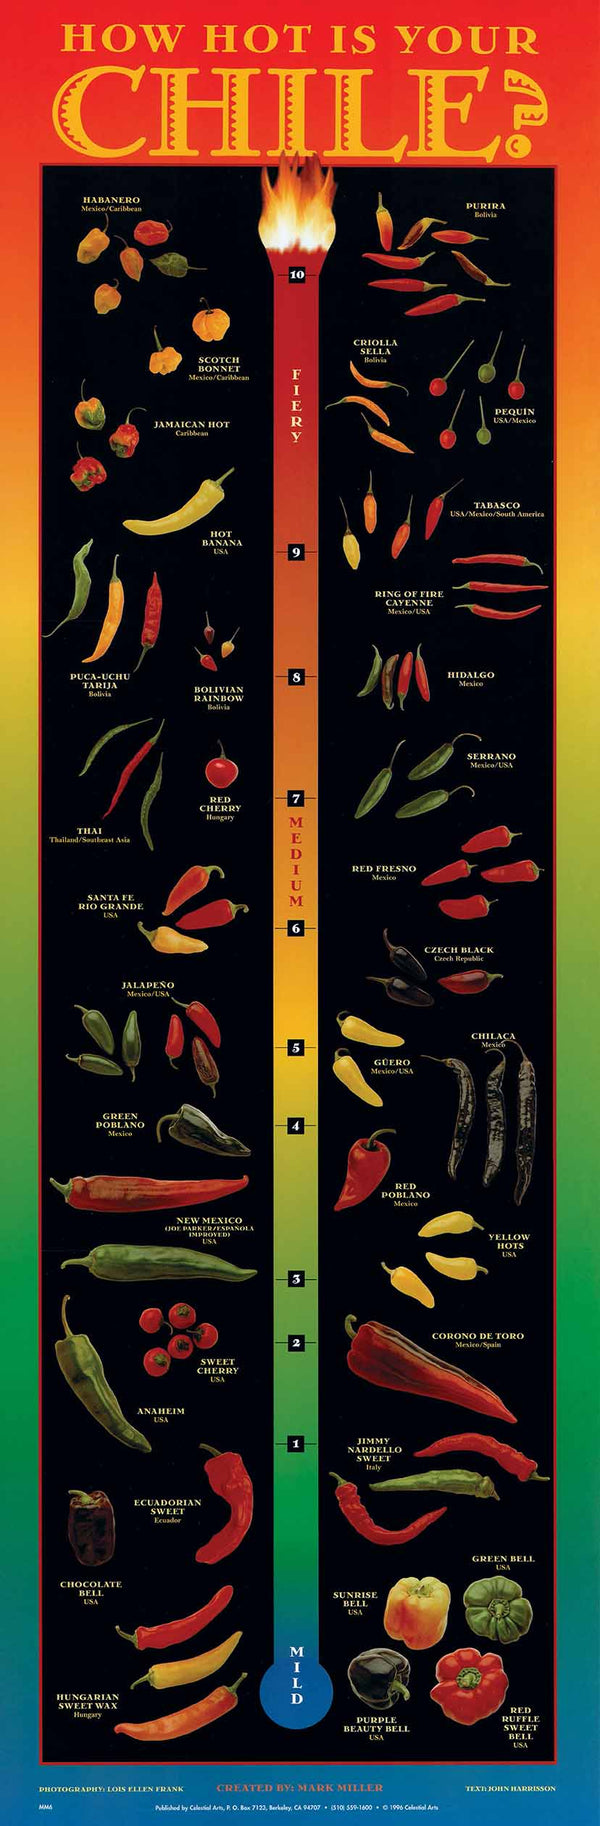 How Hot is your Chile by Mark Miller - 12 X 35 Inches (Art Print)